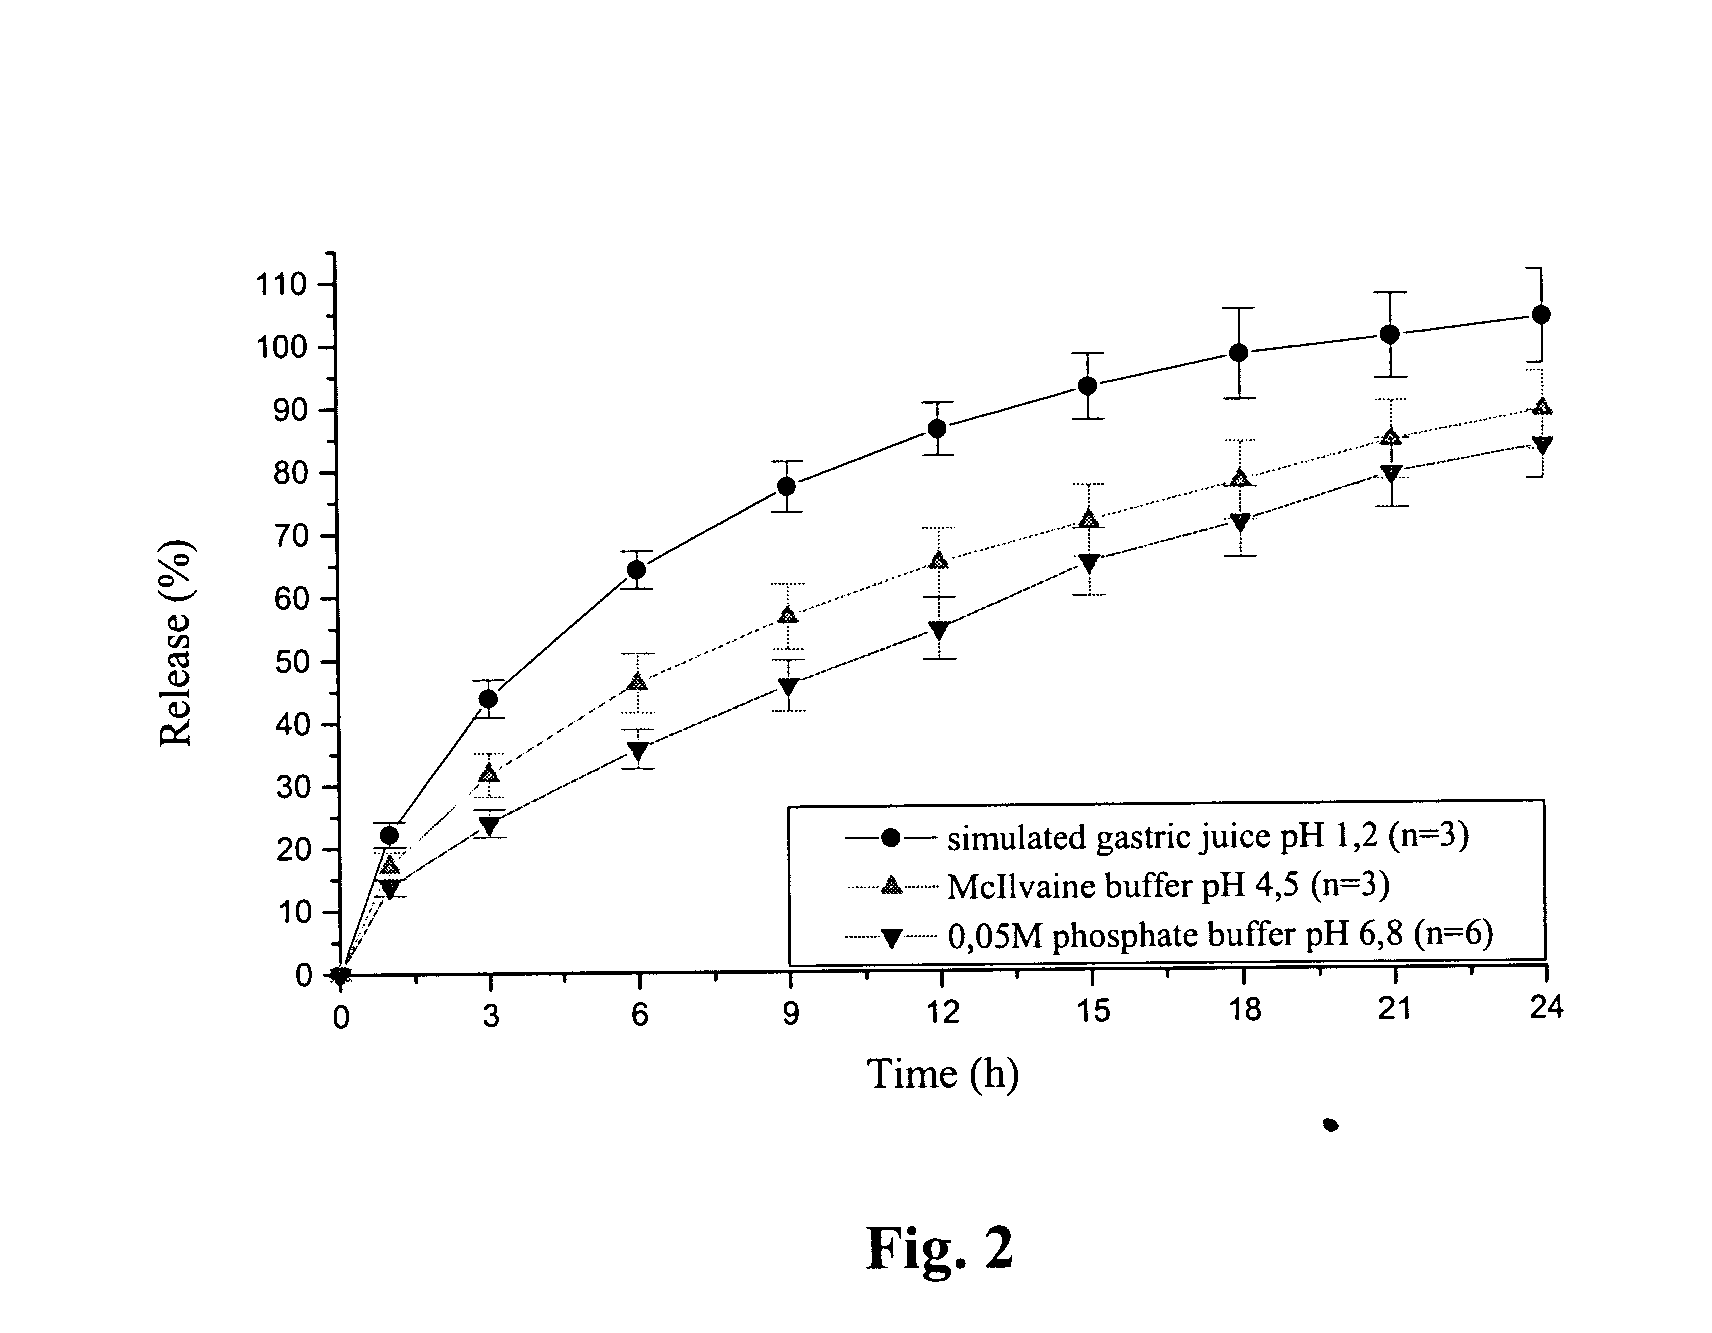 Extended release tablet formulation containing pramipexole or a pharmaceutically acceptable salt thereof